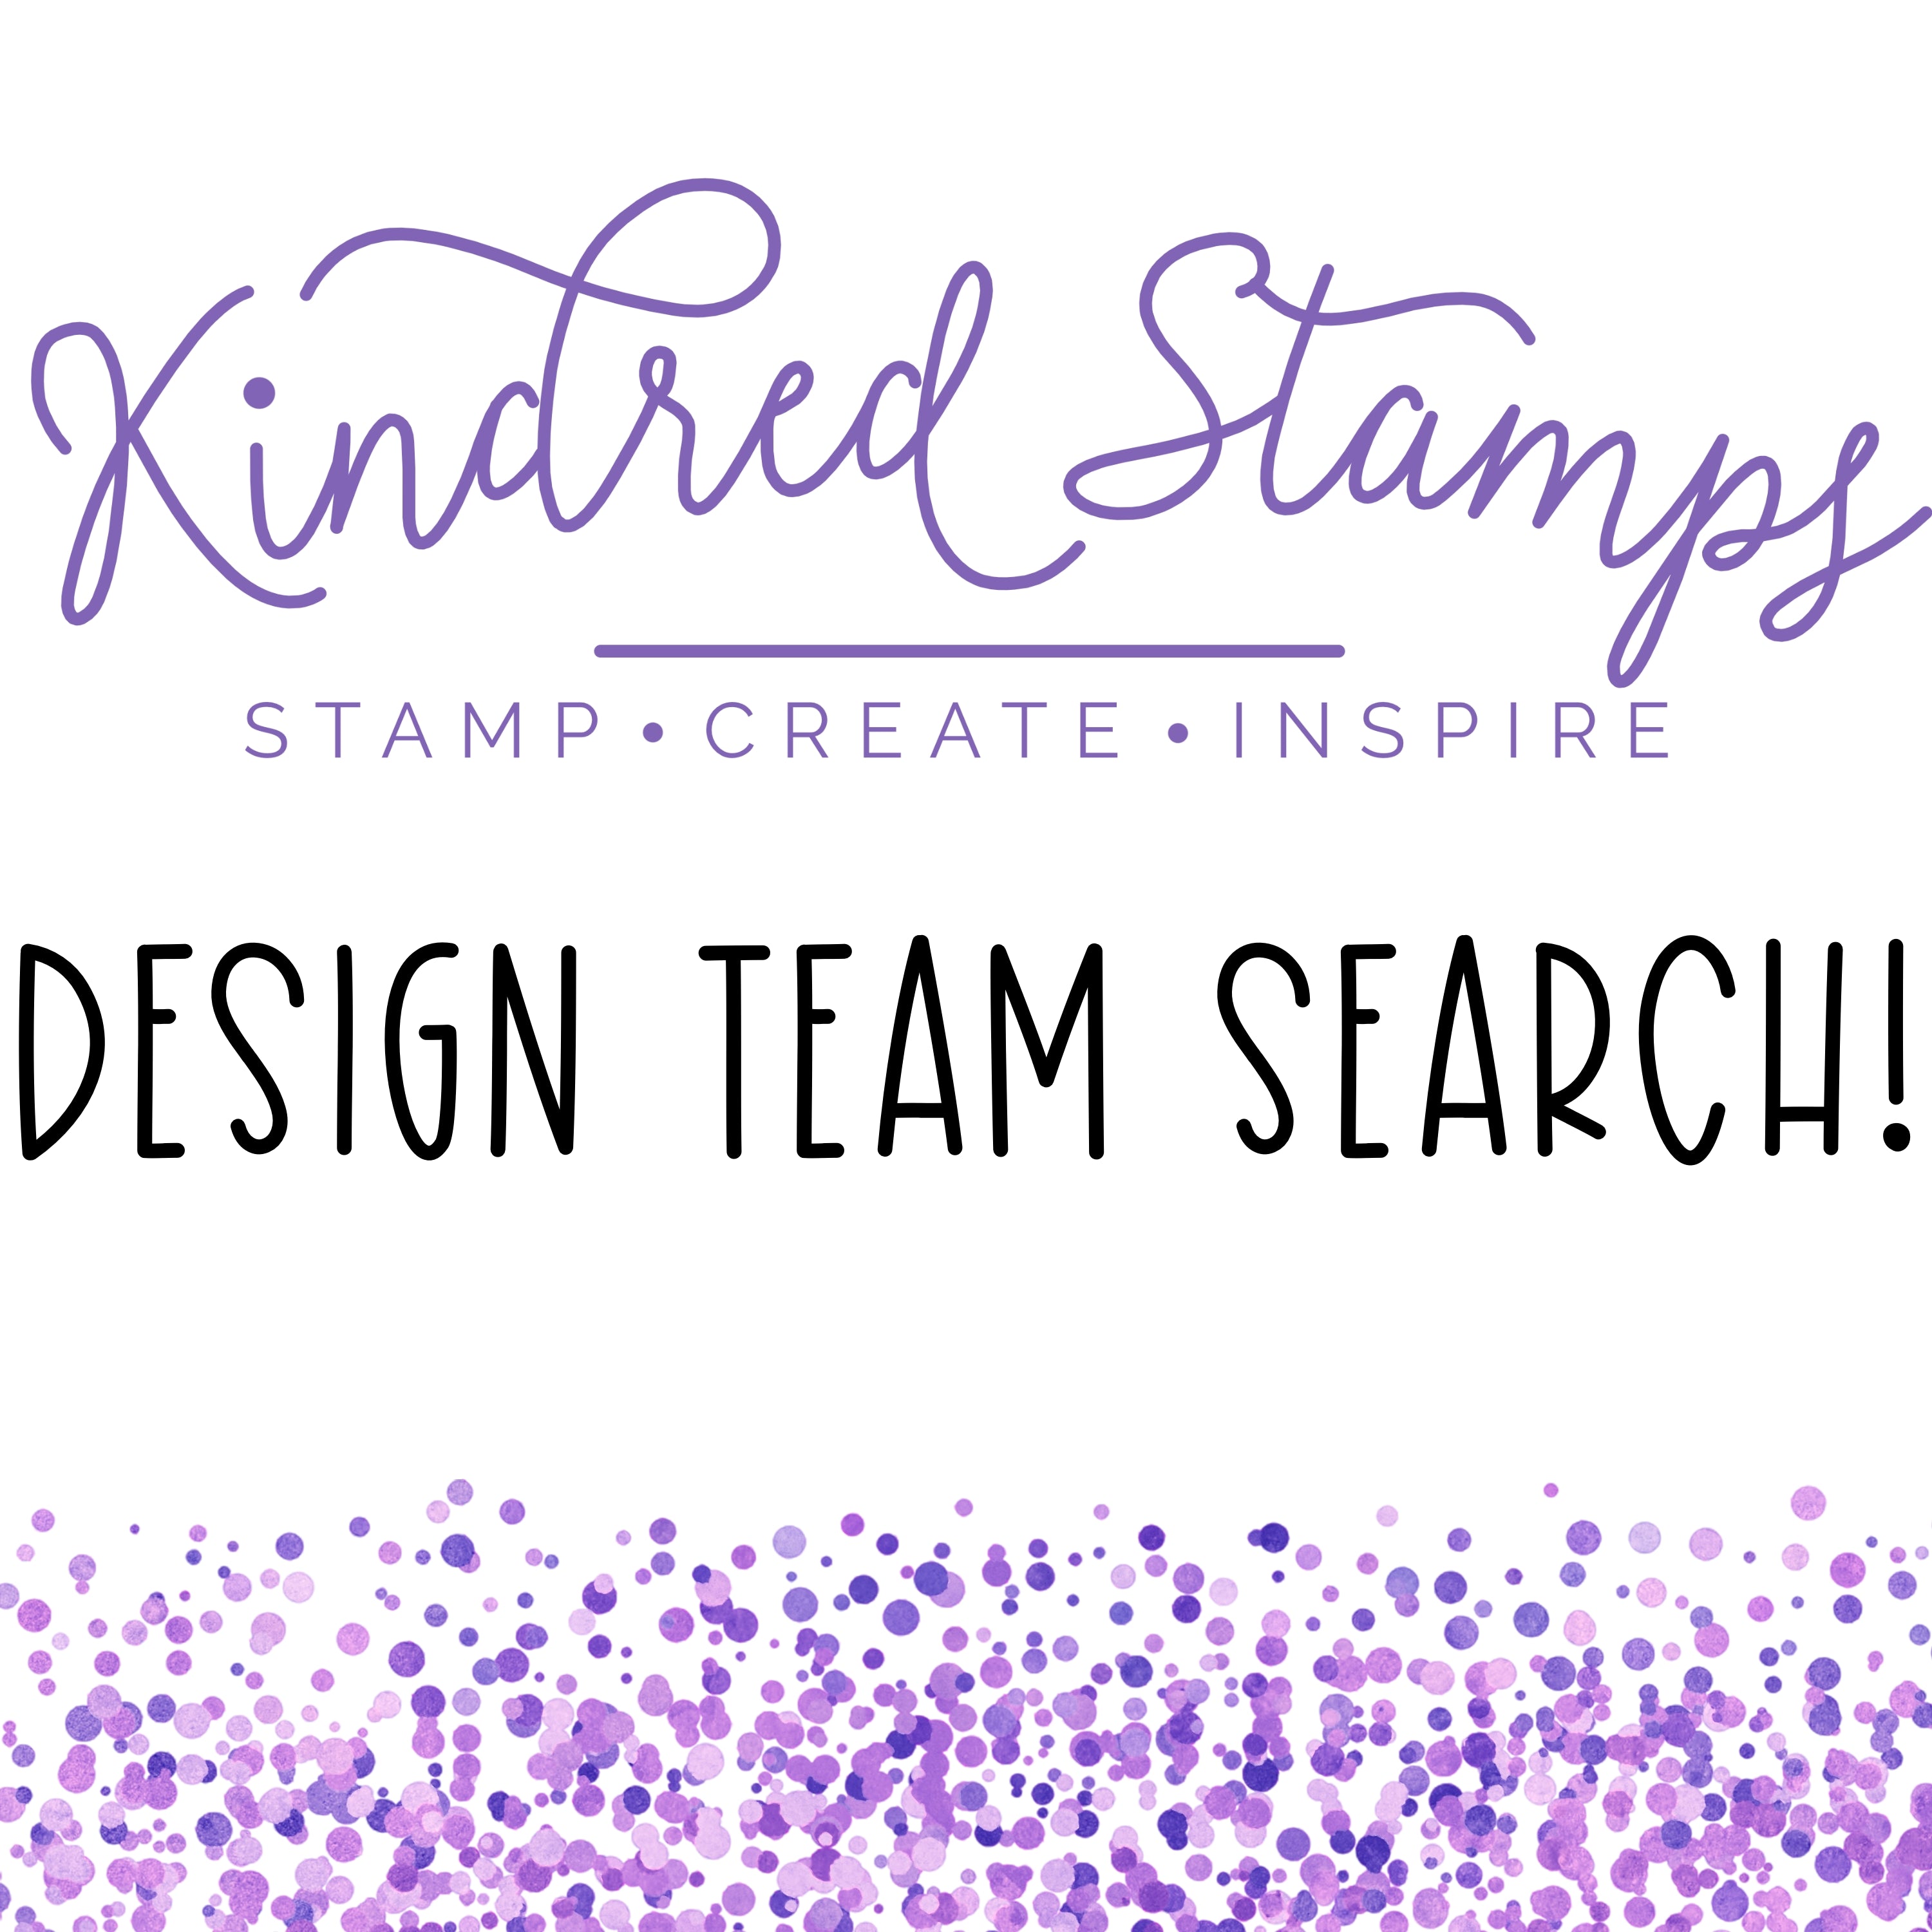 We're looking to add to our design team!